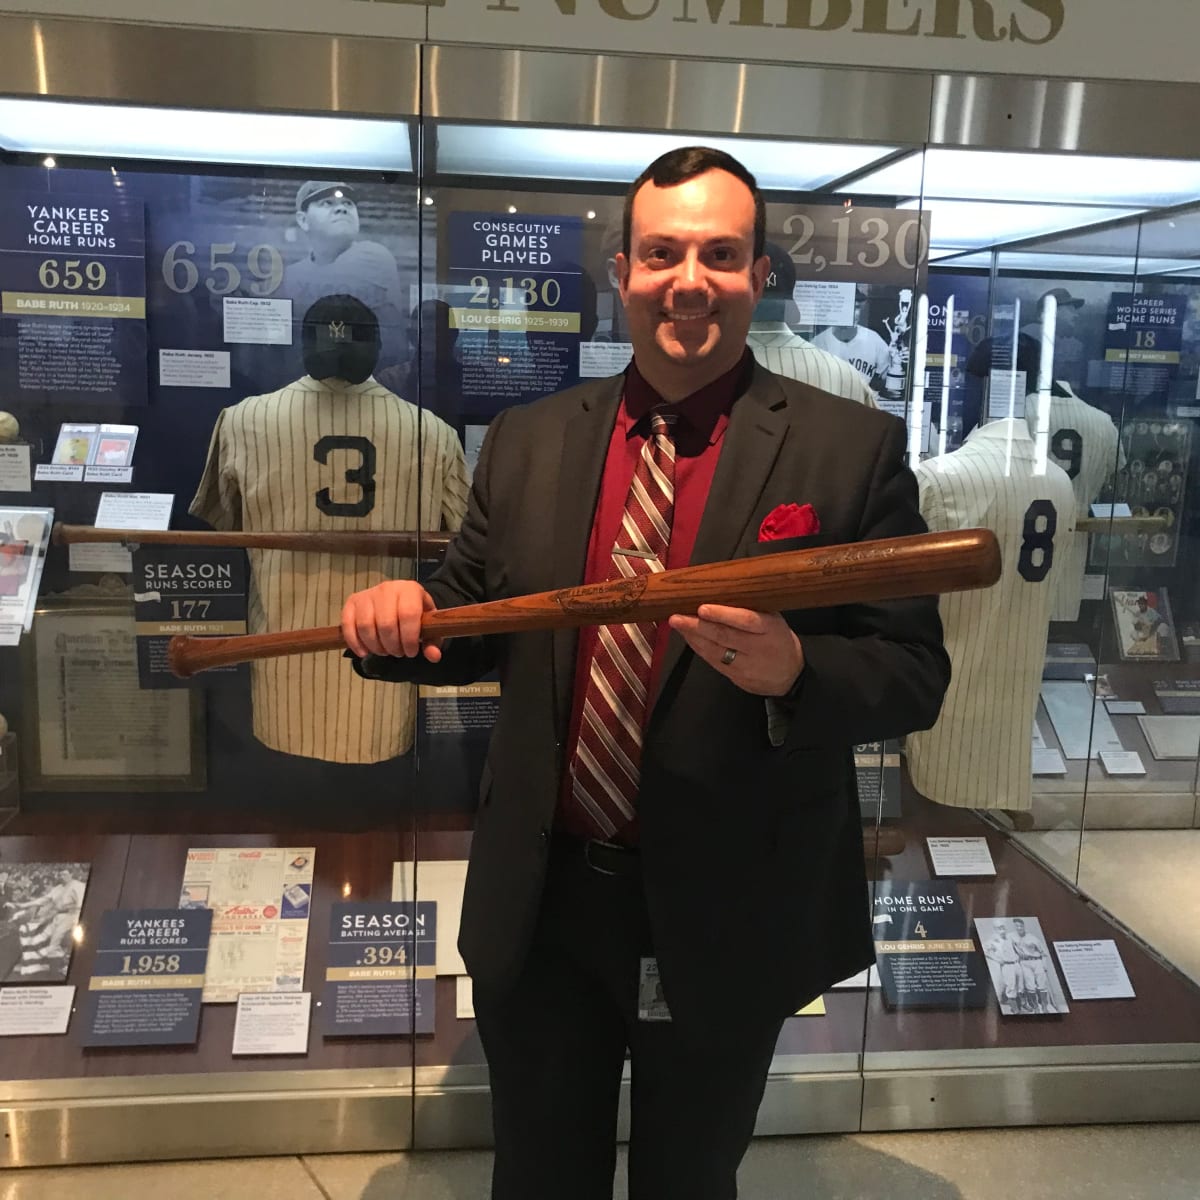 New York Yankees Museum presented by Bank of America - Permanent Exhibits